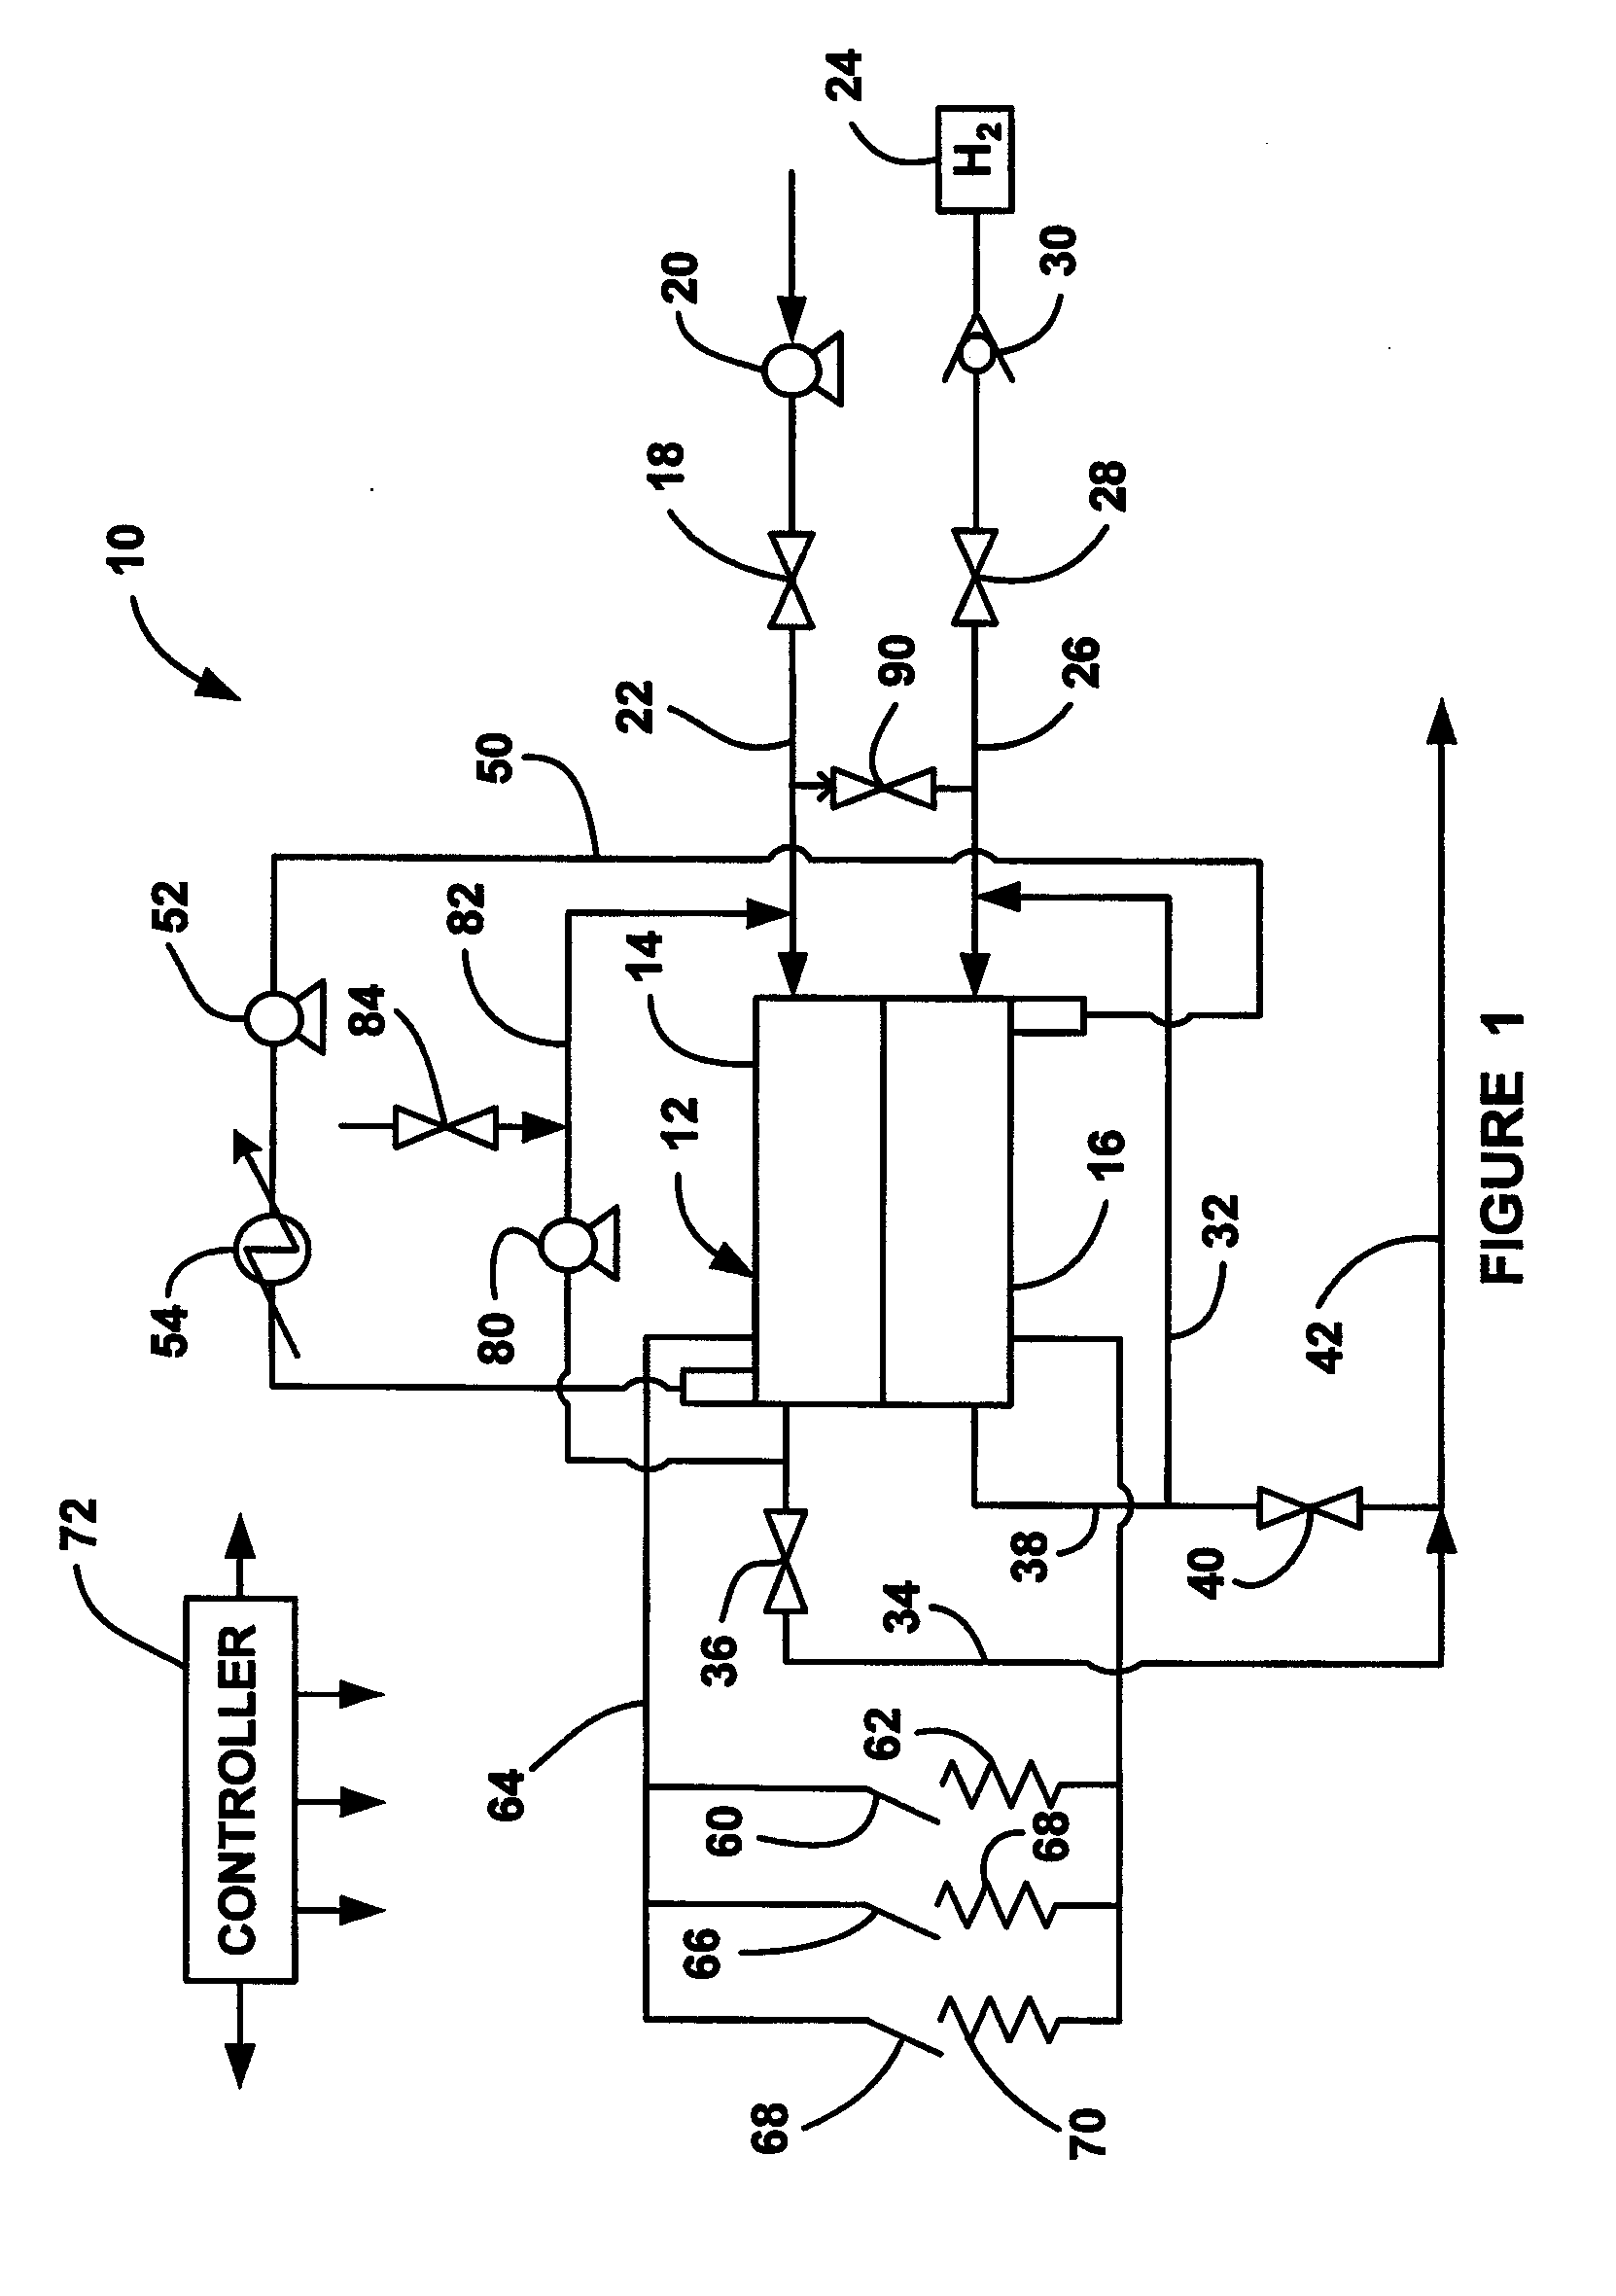 Method for mitigating cell degradation due to startup and shutdown via cathode re-circulation combined with electrical shorting of stack